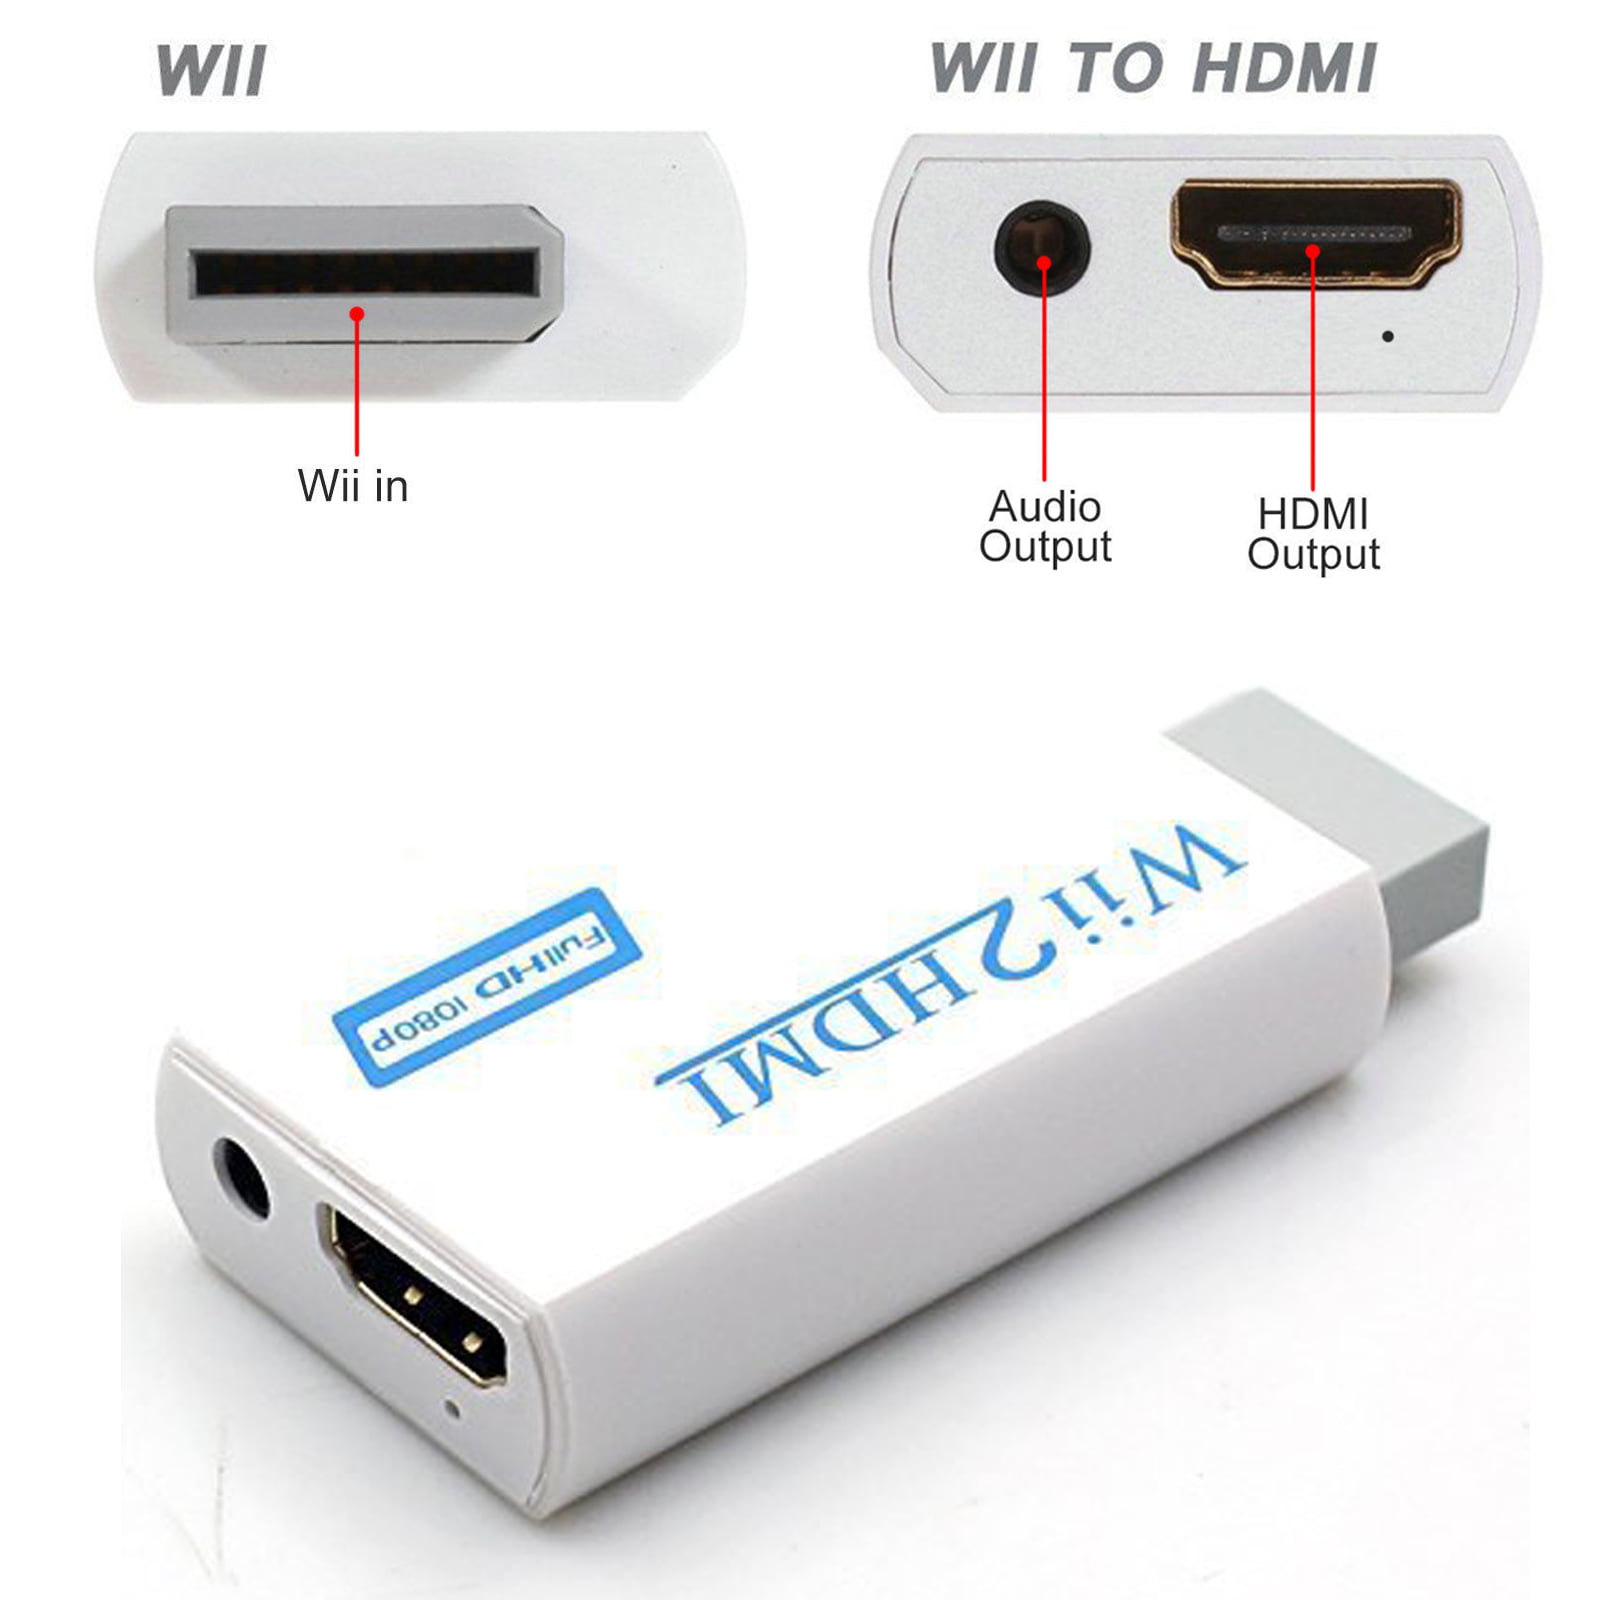 How do you connect your Nintendo Wii to an HDMI port?